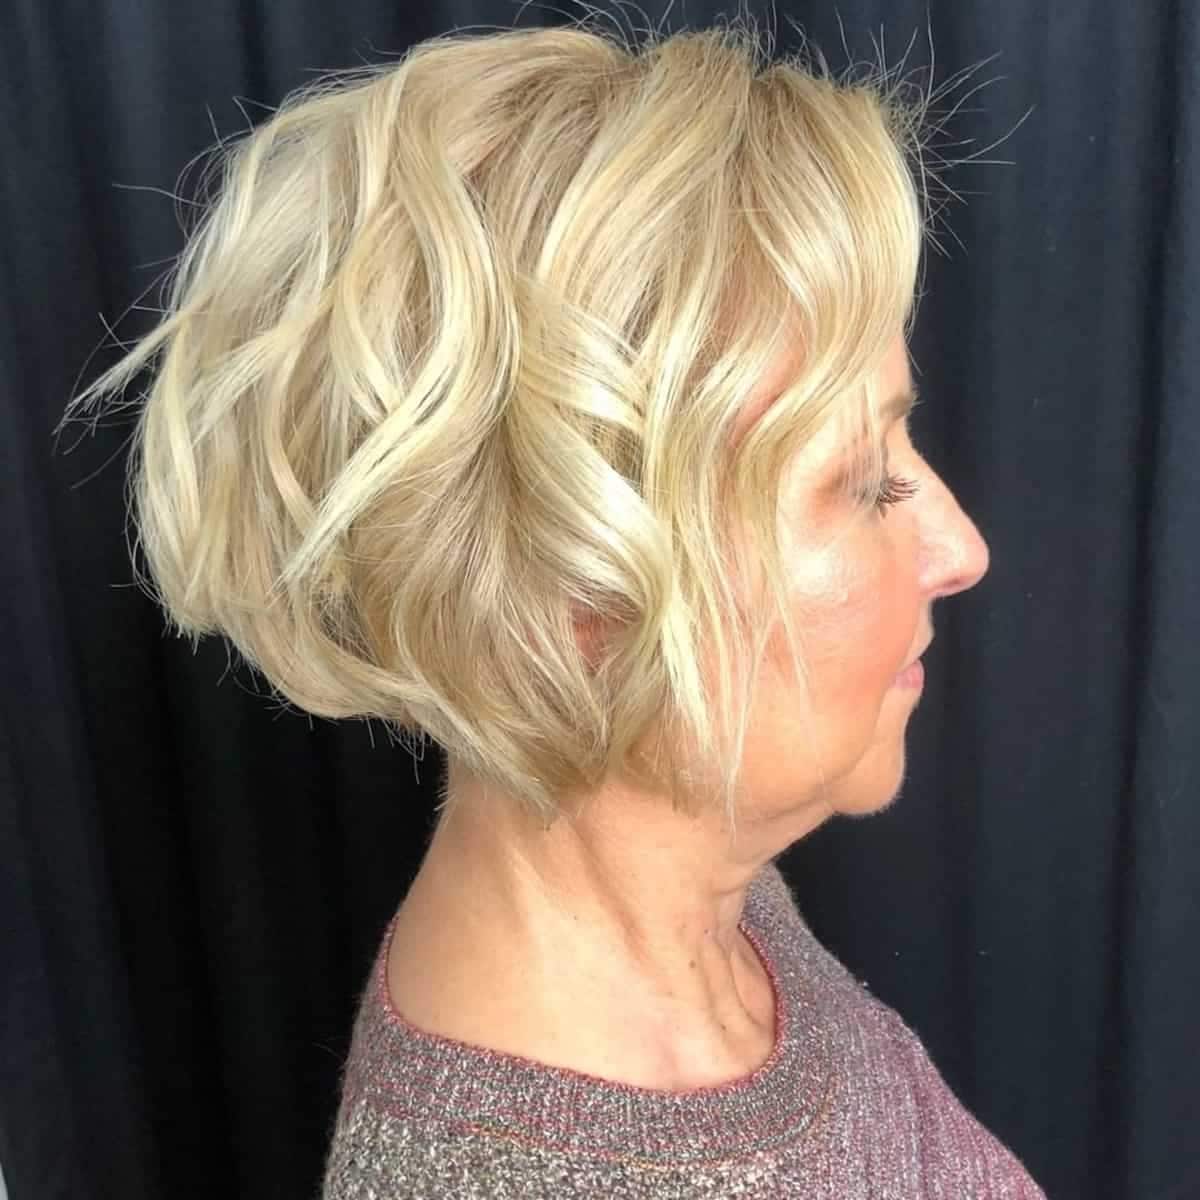 Pin on Medium Length Hairstyles For Women Over 50